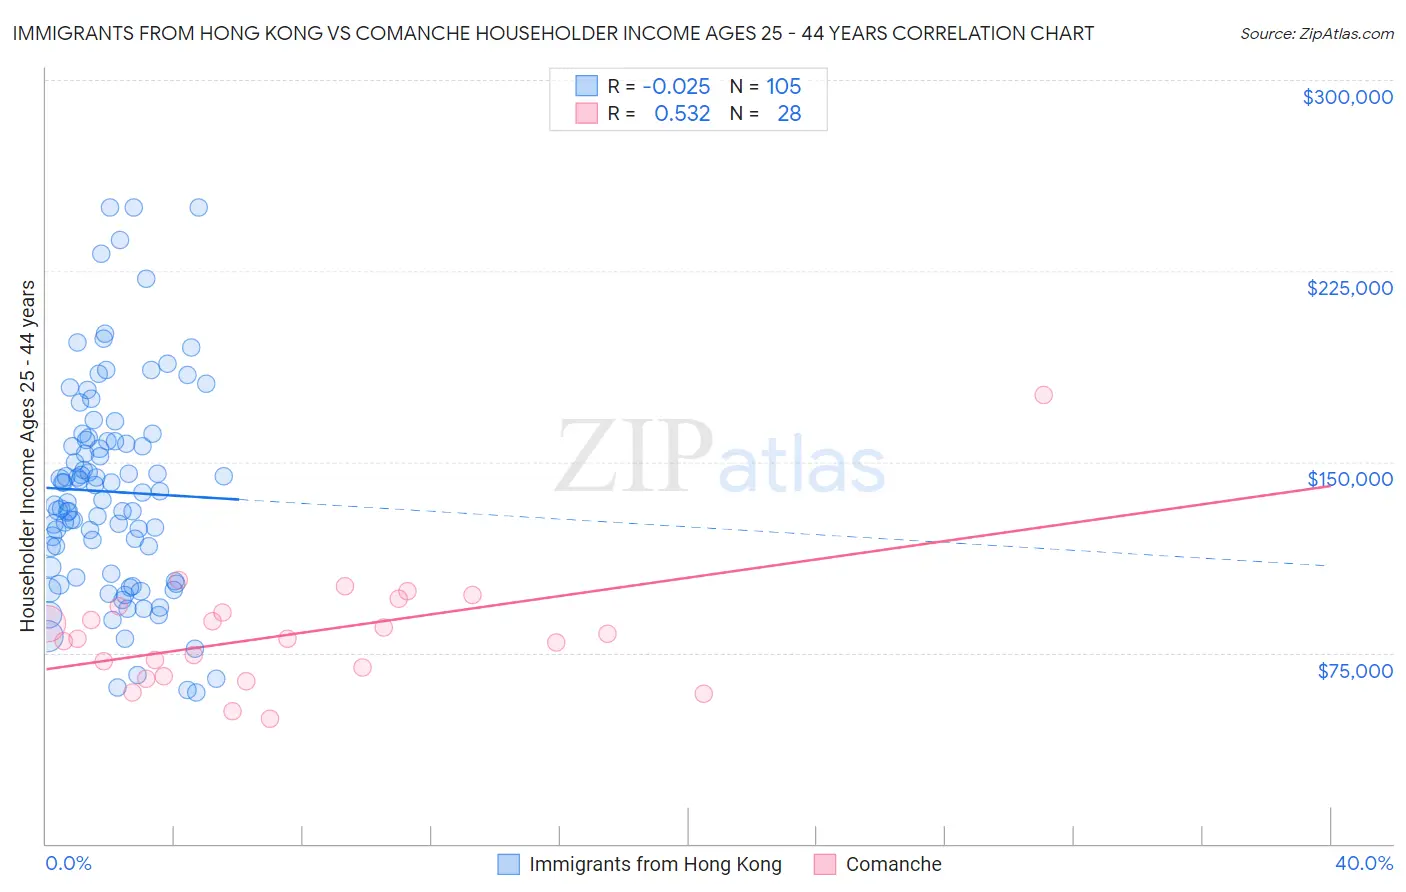 Immigrants from Hong Kong vs Comanche Householder Income Ages 25 - 44 years